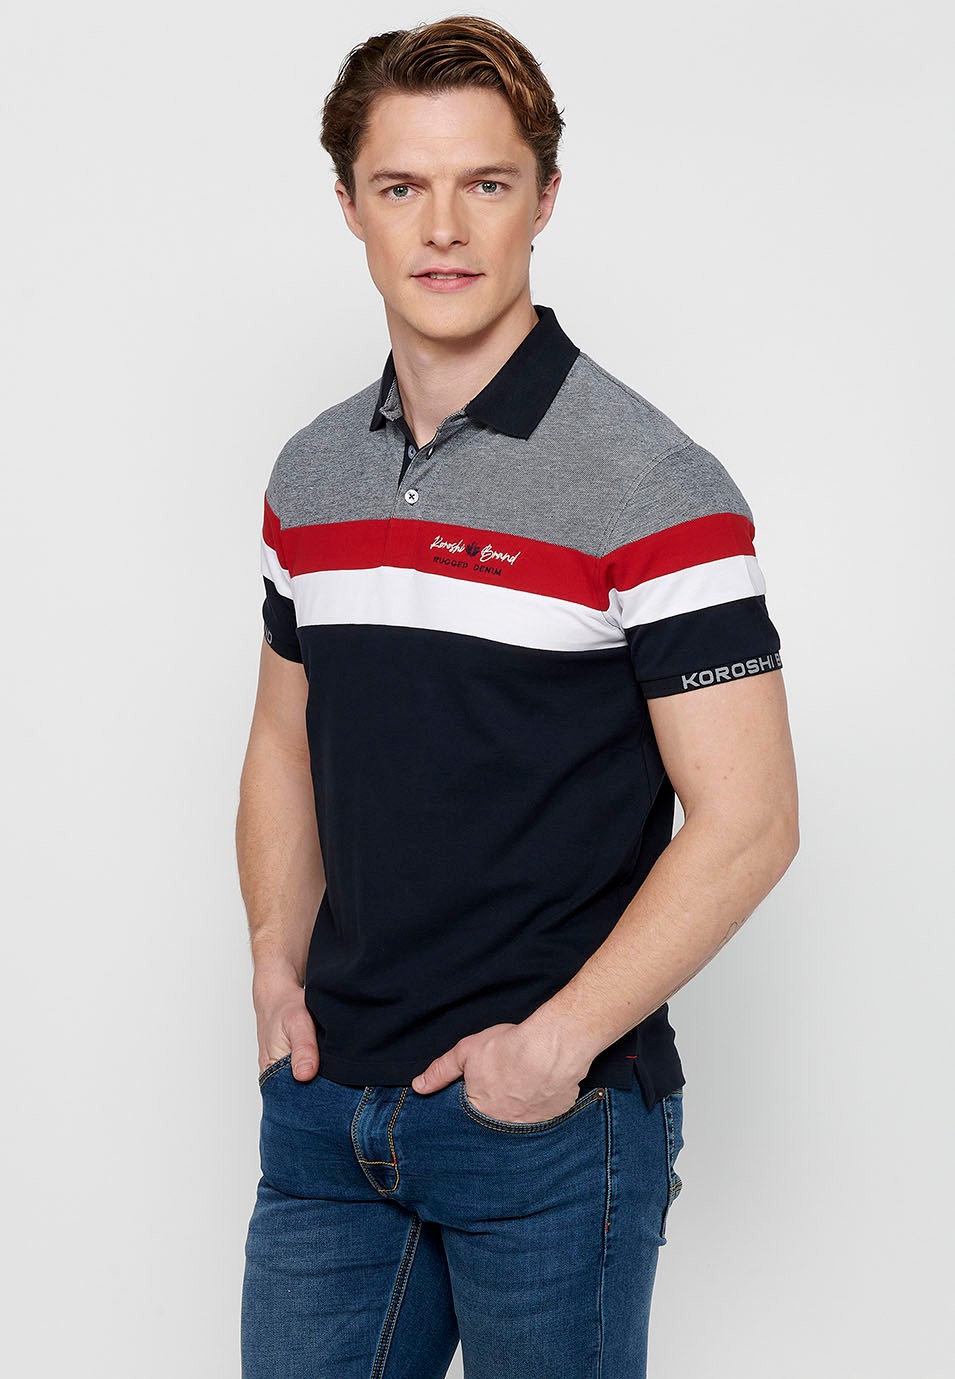 100% cotton short sleeve polo shirt, striped detail on the chest, navy color for men 3